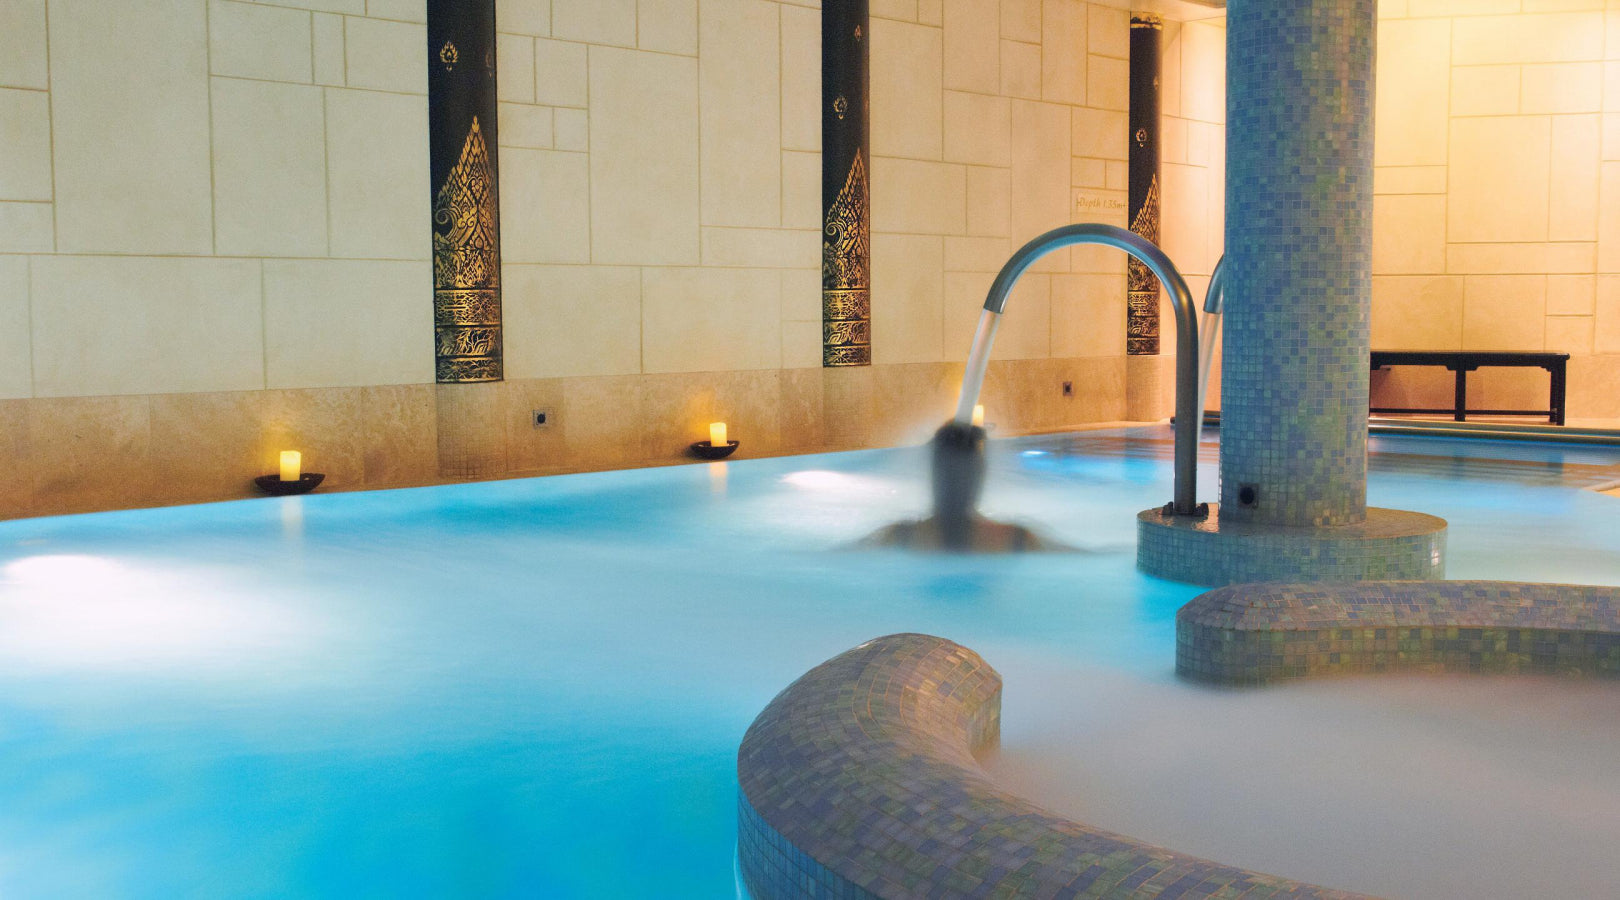 The Unconventional Resolution To Do Less: starting With A SenSpa Spa Day